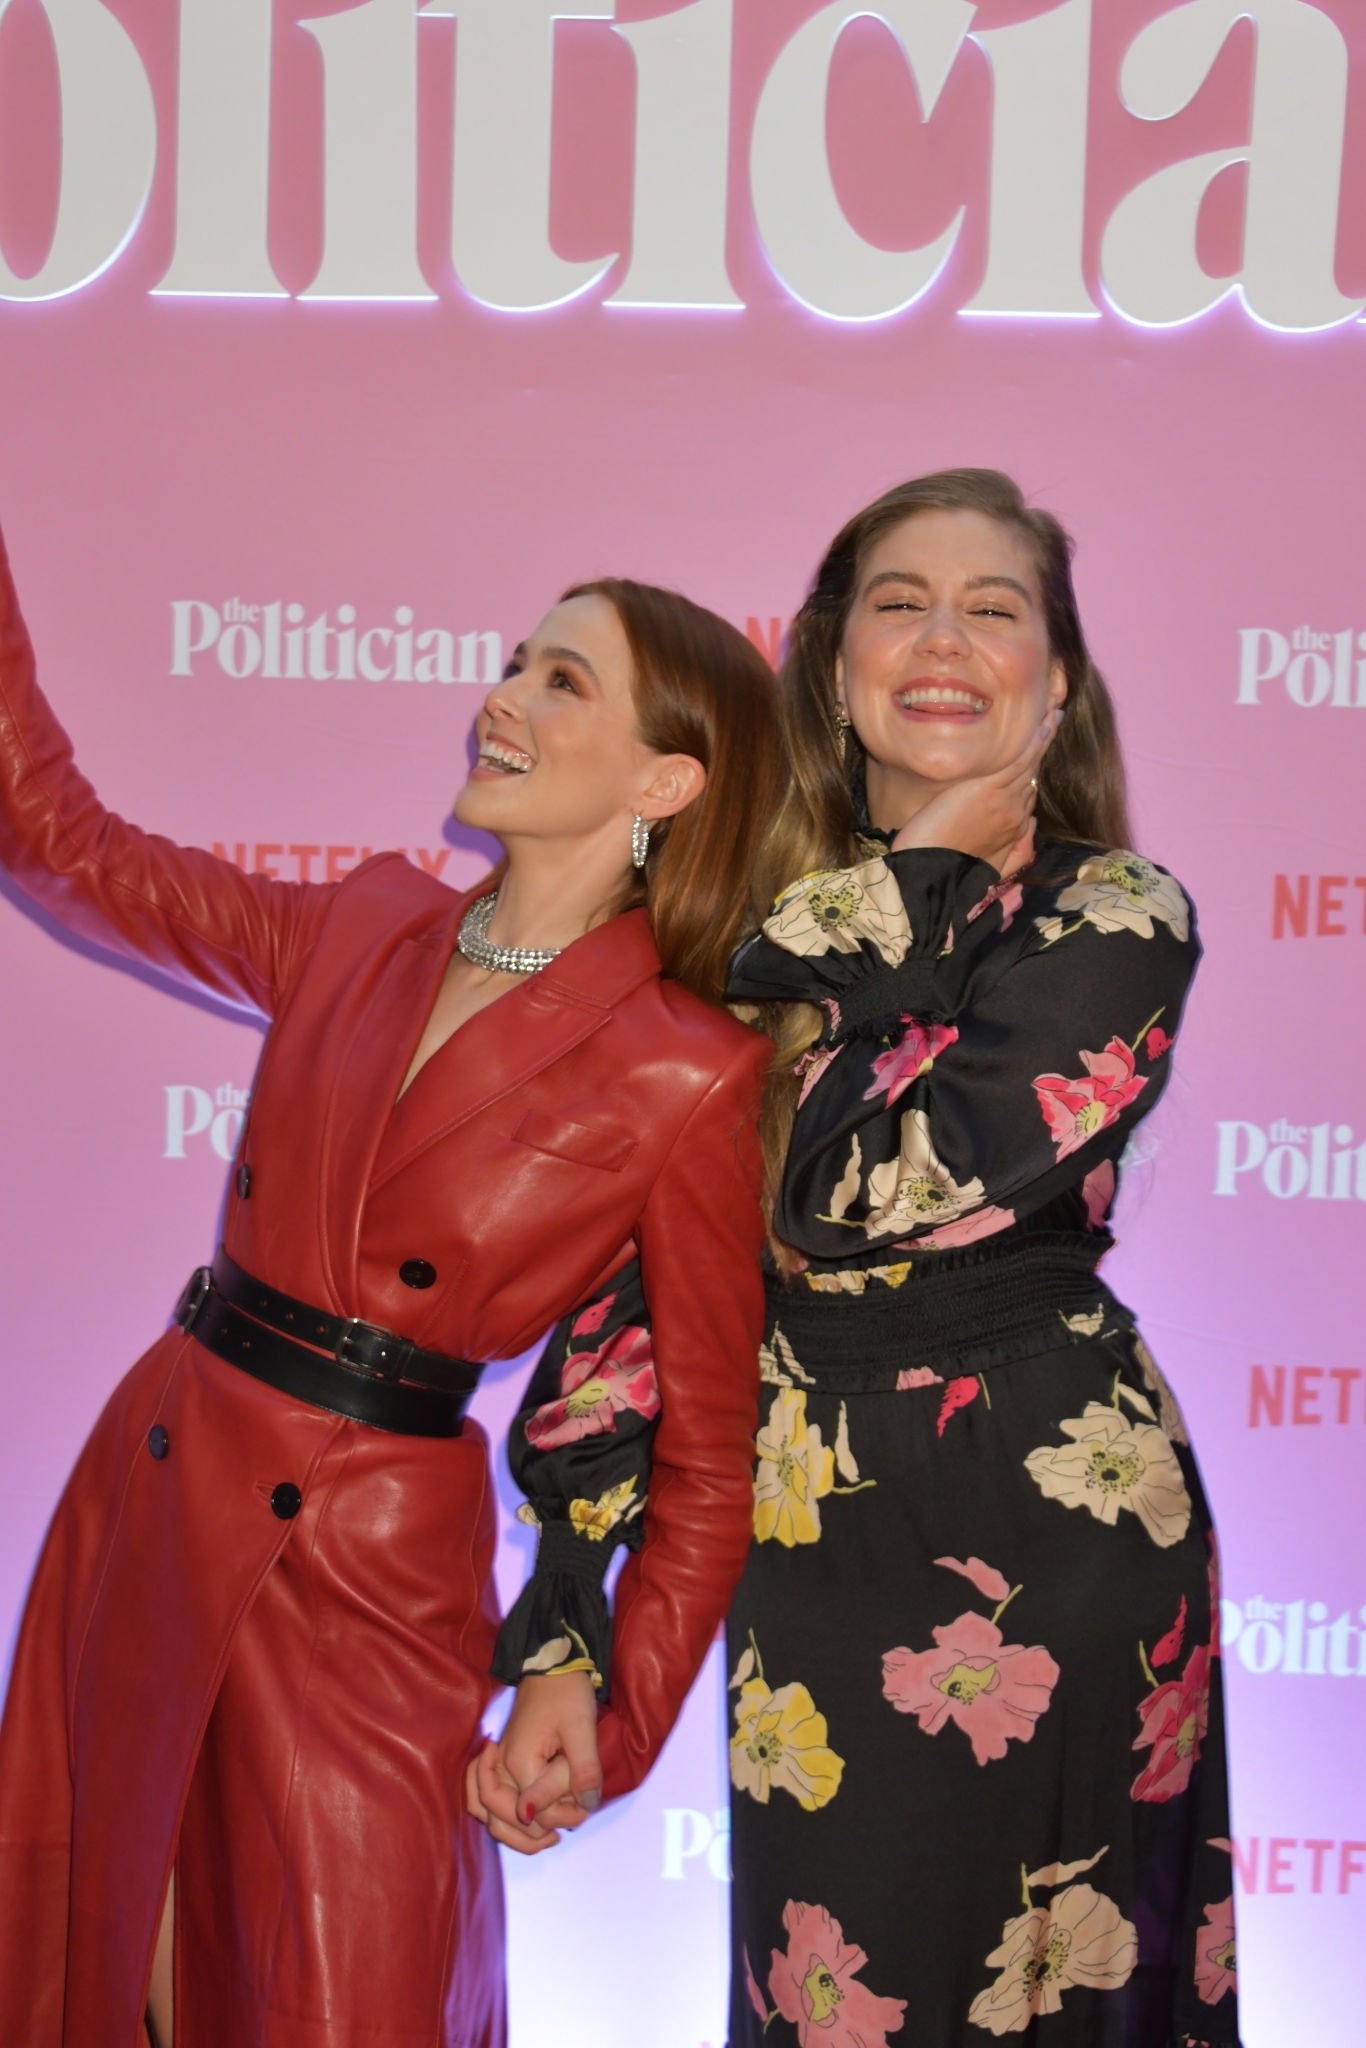 Zoey Deutch attends a Netflix special screening of “The Politician”